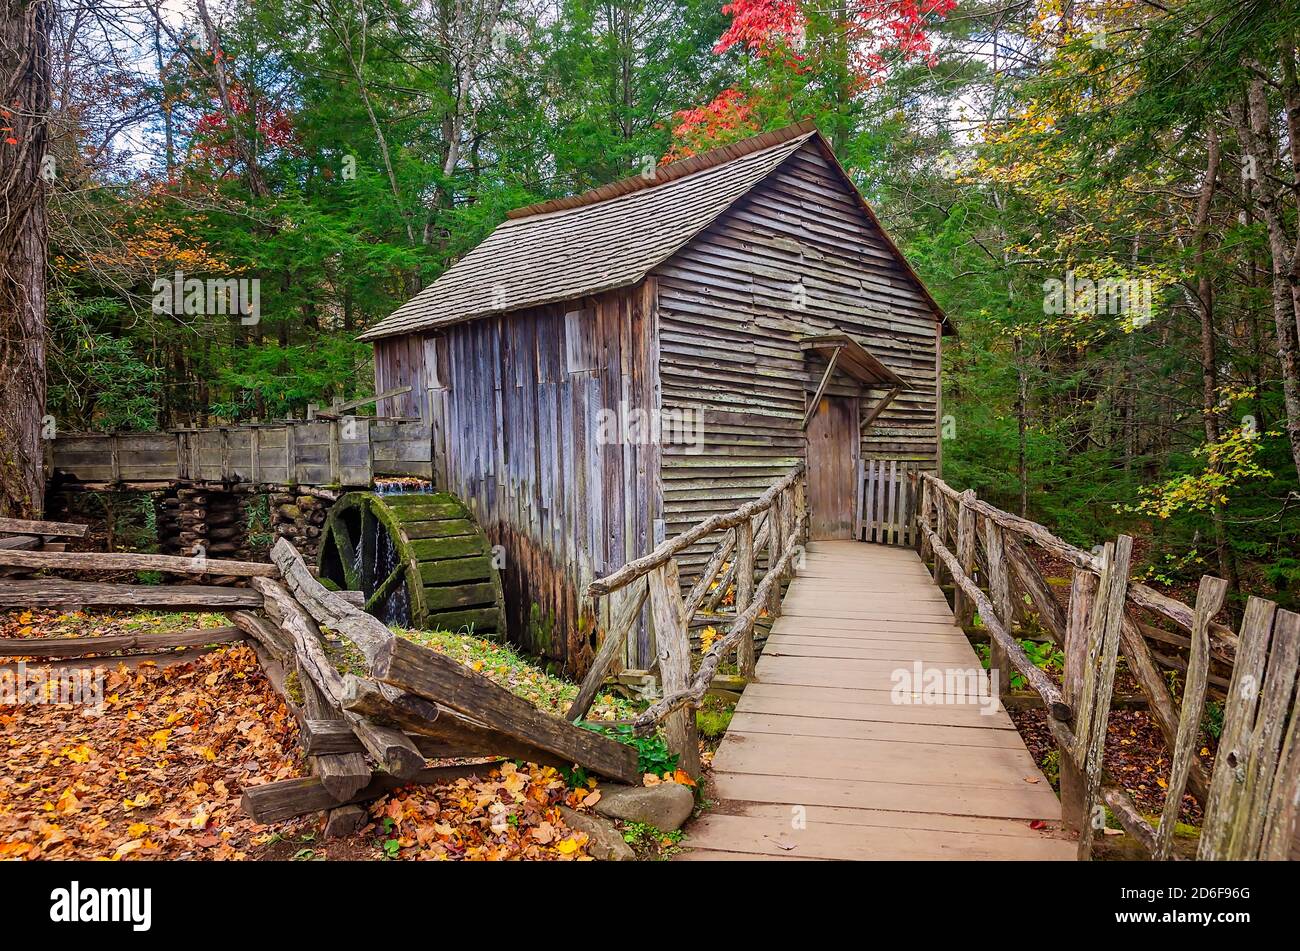 The Cable Grist Mill is pictured at the John P. Cable Mill Complex in Great Smoky Mountains National Park, Nov. 2, 2017, in Townsend, Tennessee. Stock Photo